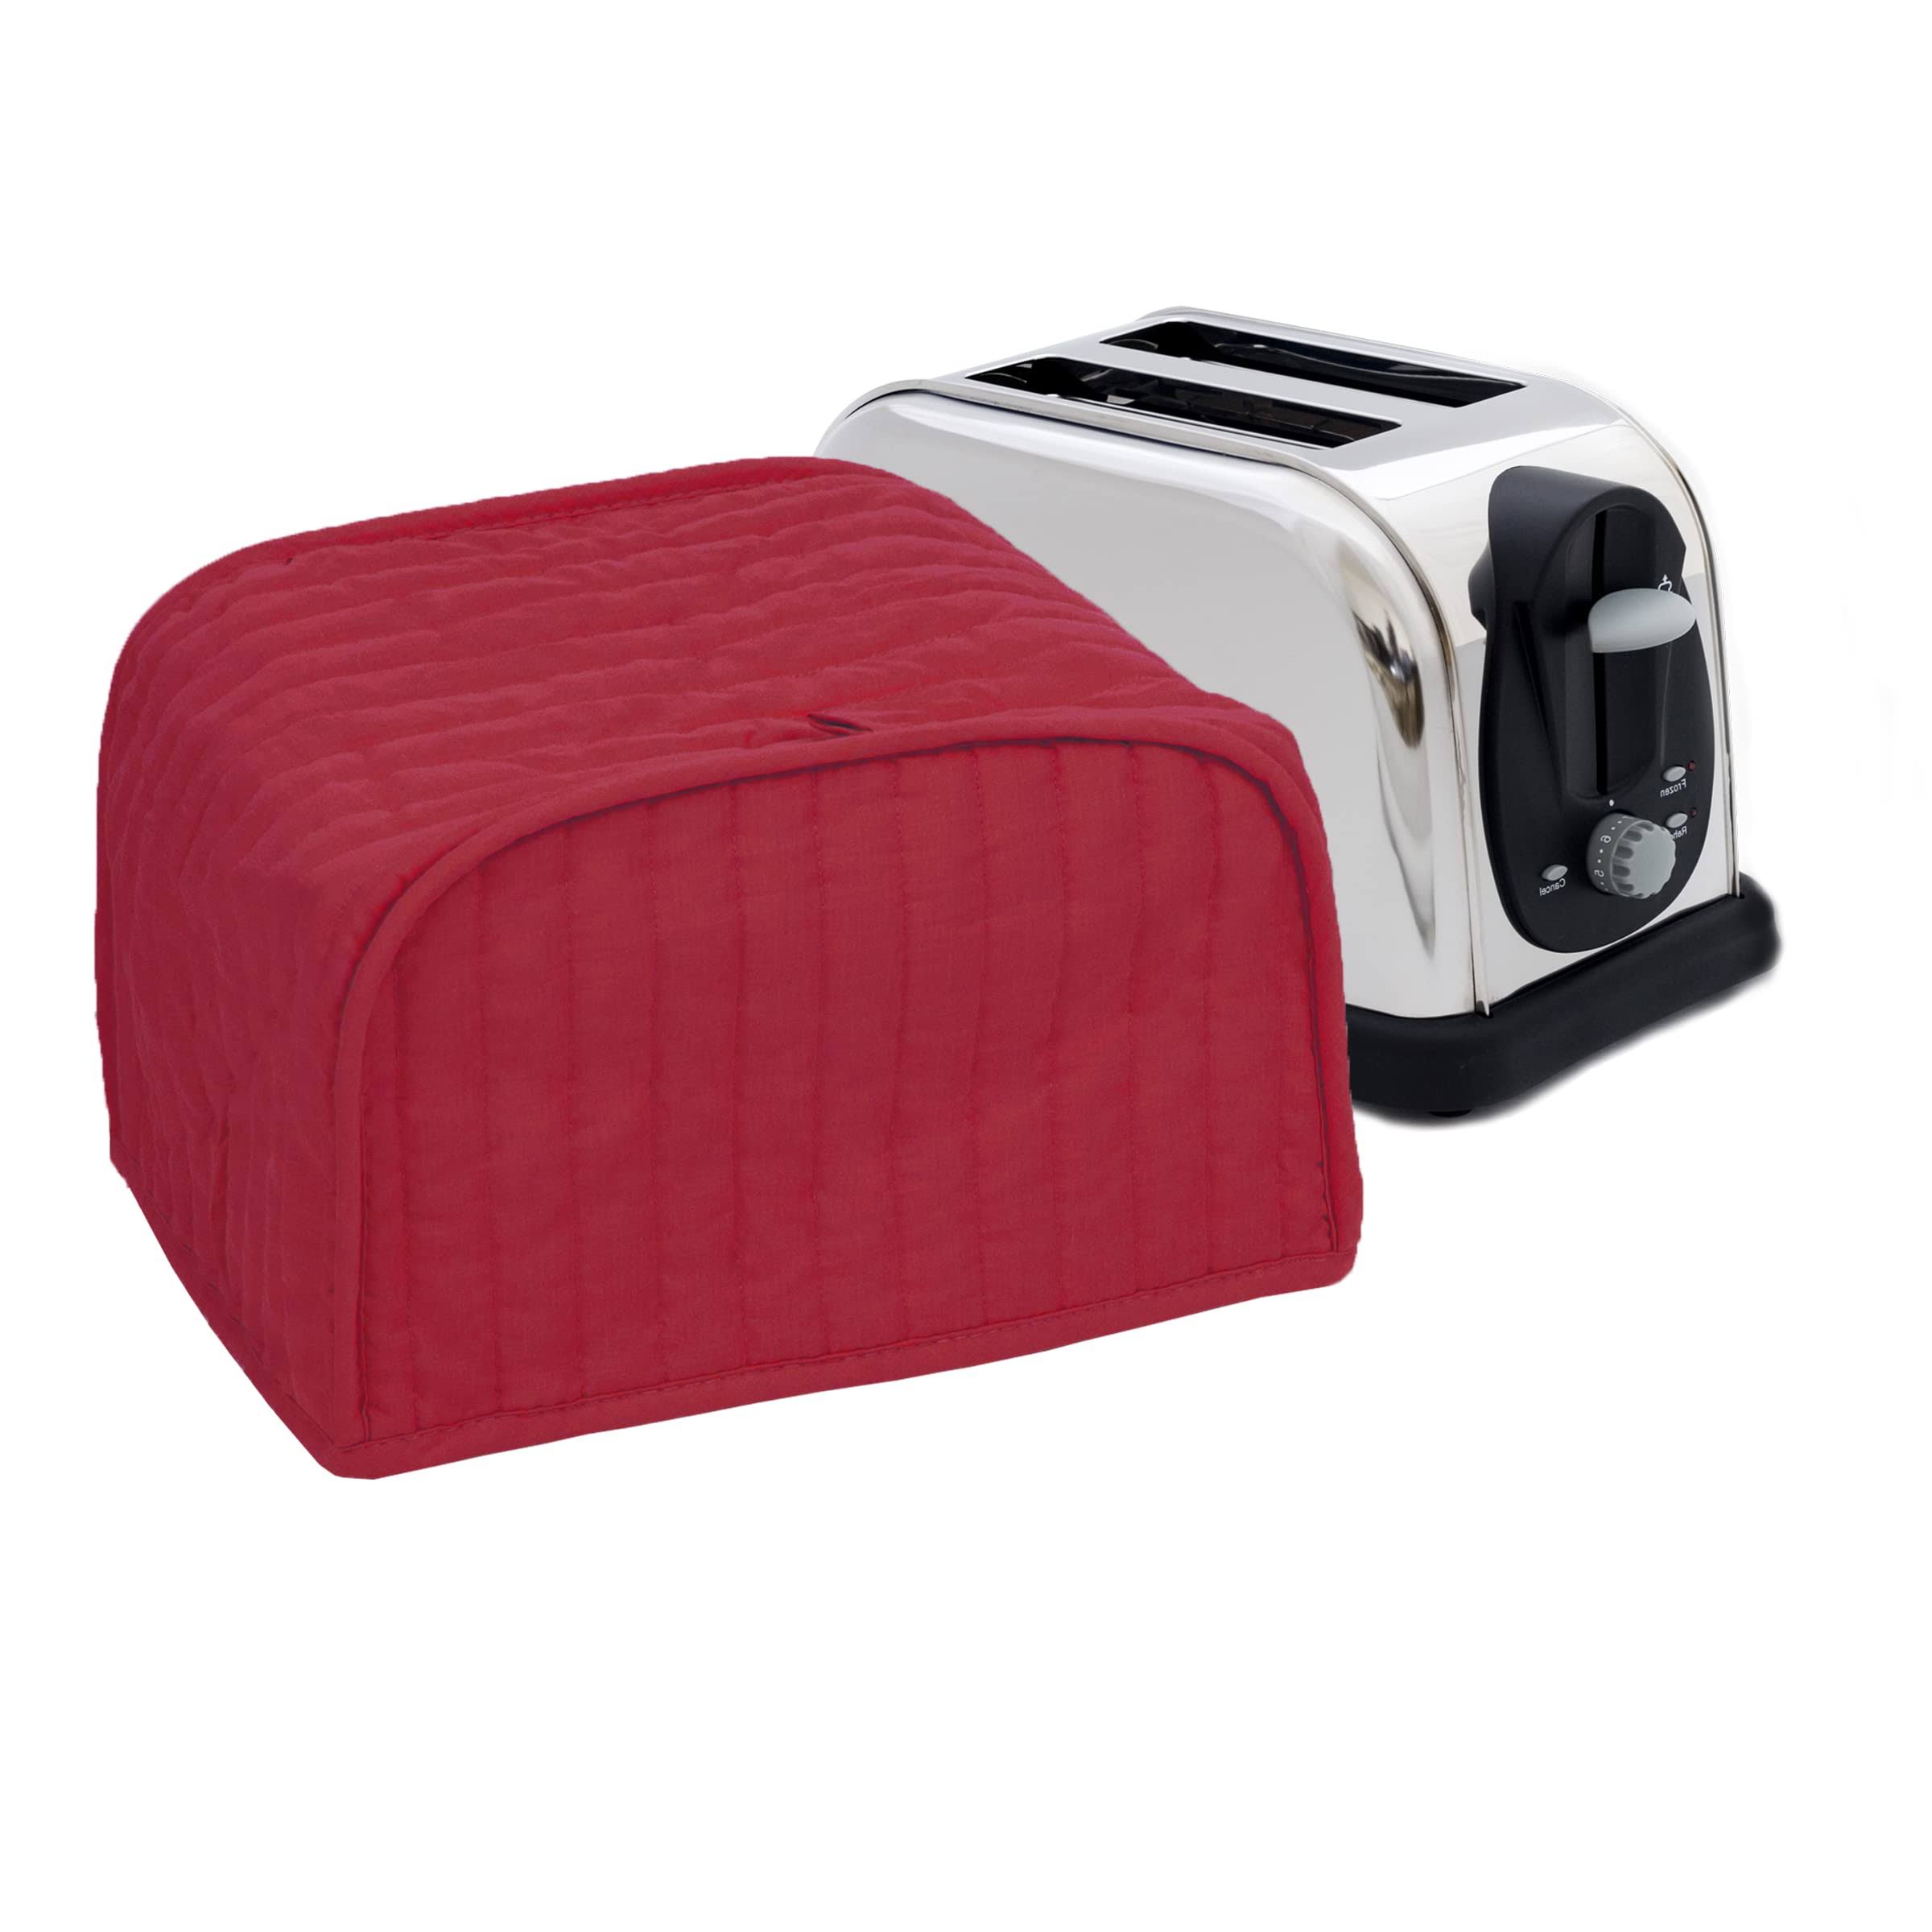 Ritz Cotton Quilted Two Slice Toaster Dust Cover - Red